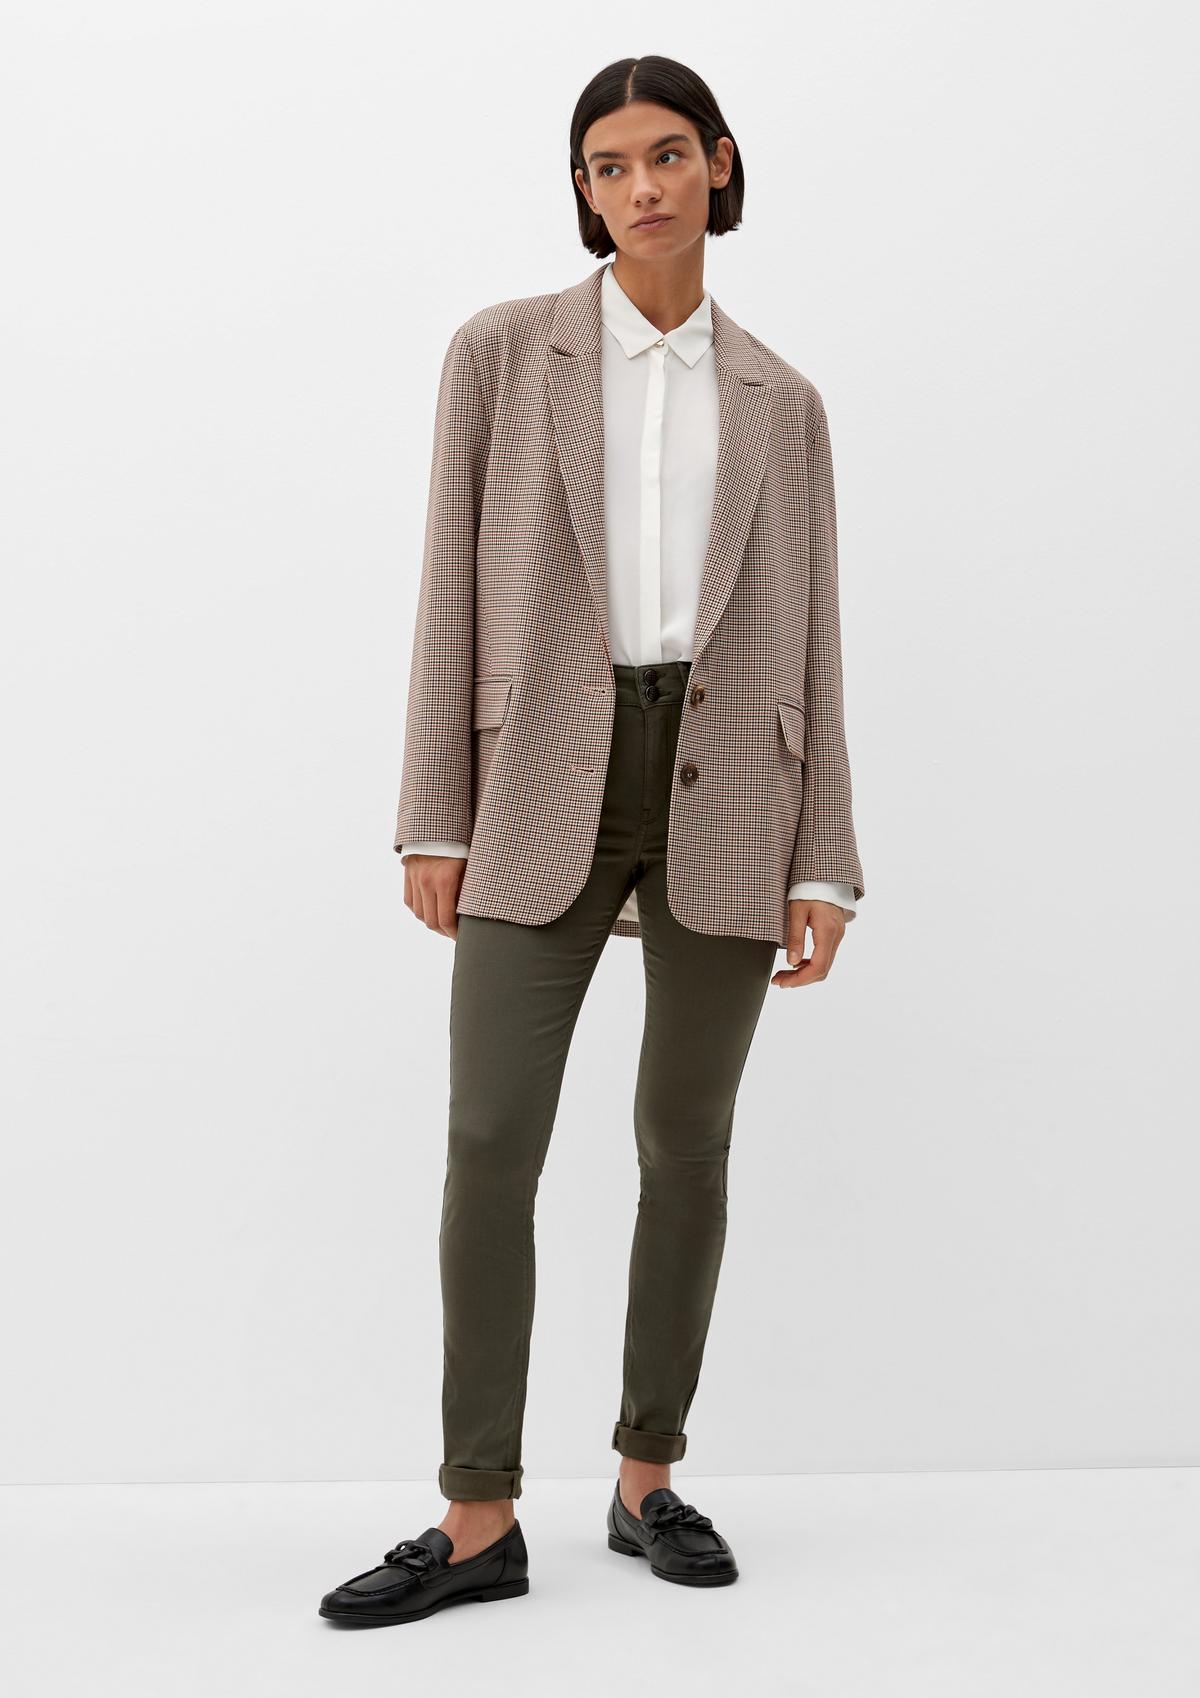 s.Oliver Slim fit: cotton satin trousers